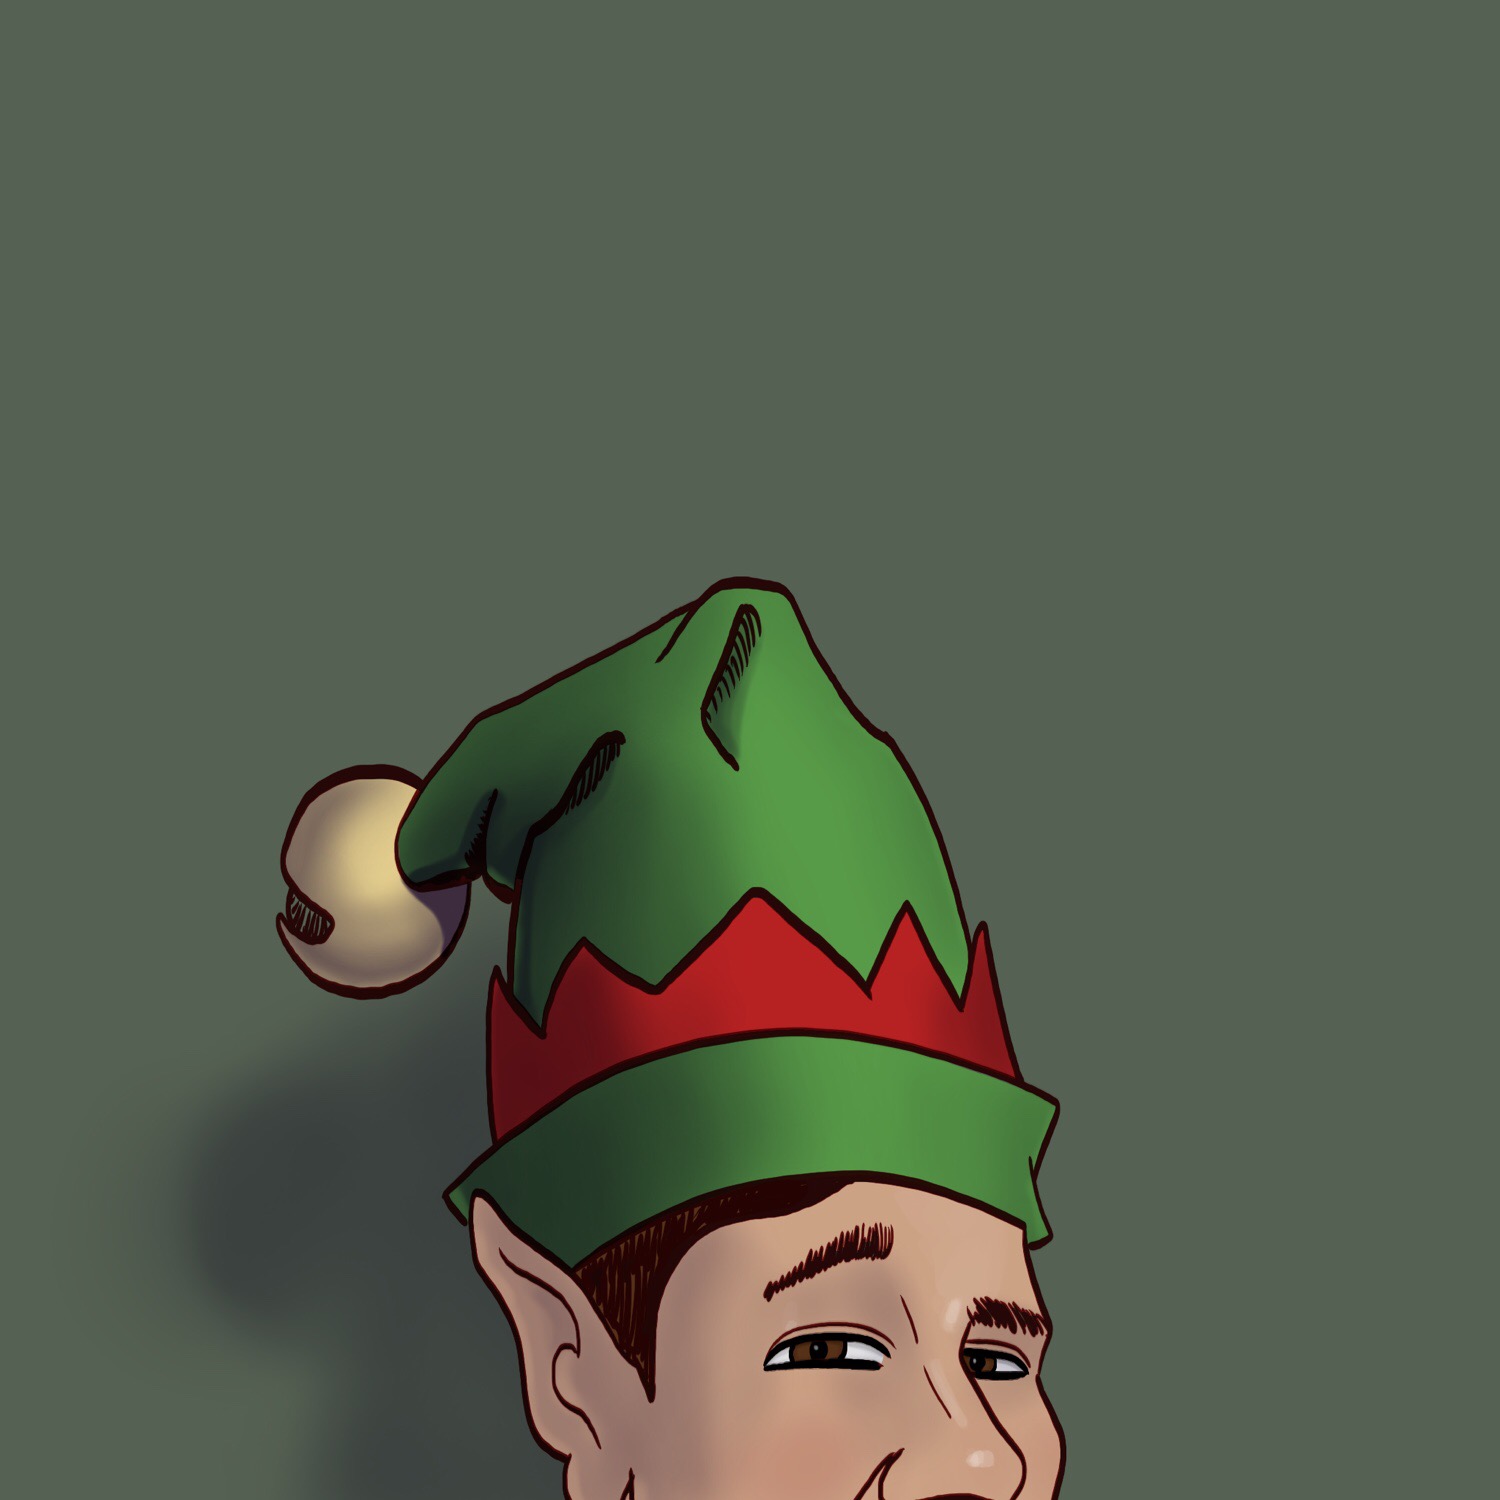 Illustration of a Christmas elf. He's a bit too short to fit in the frame. 